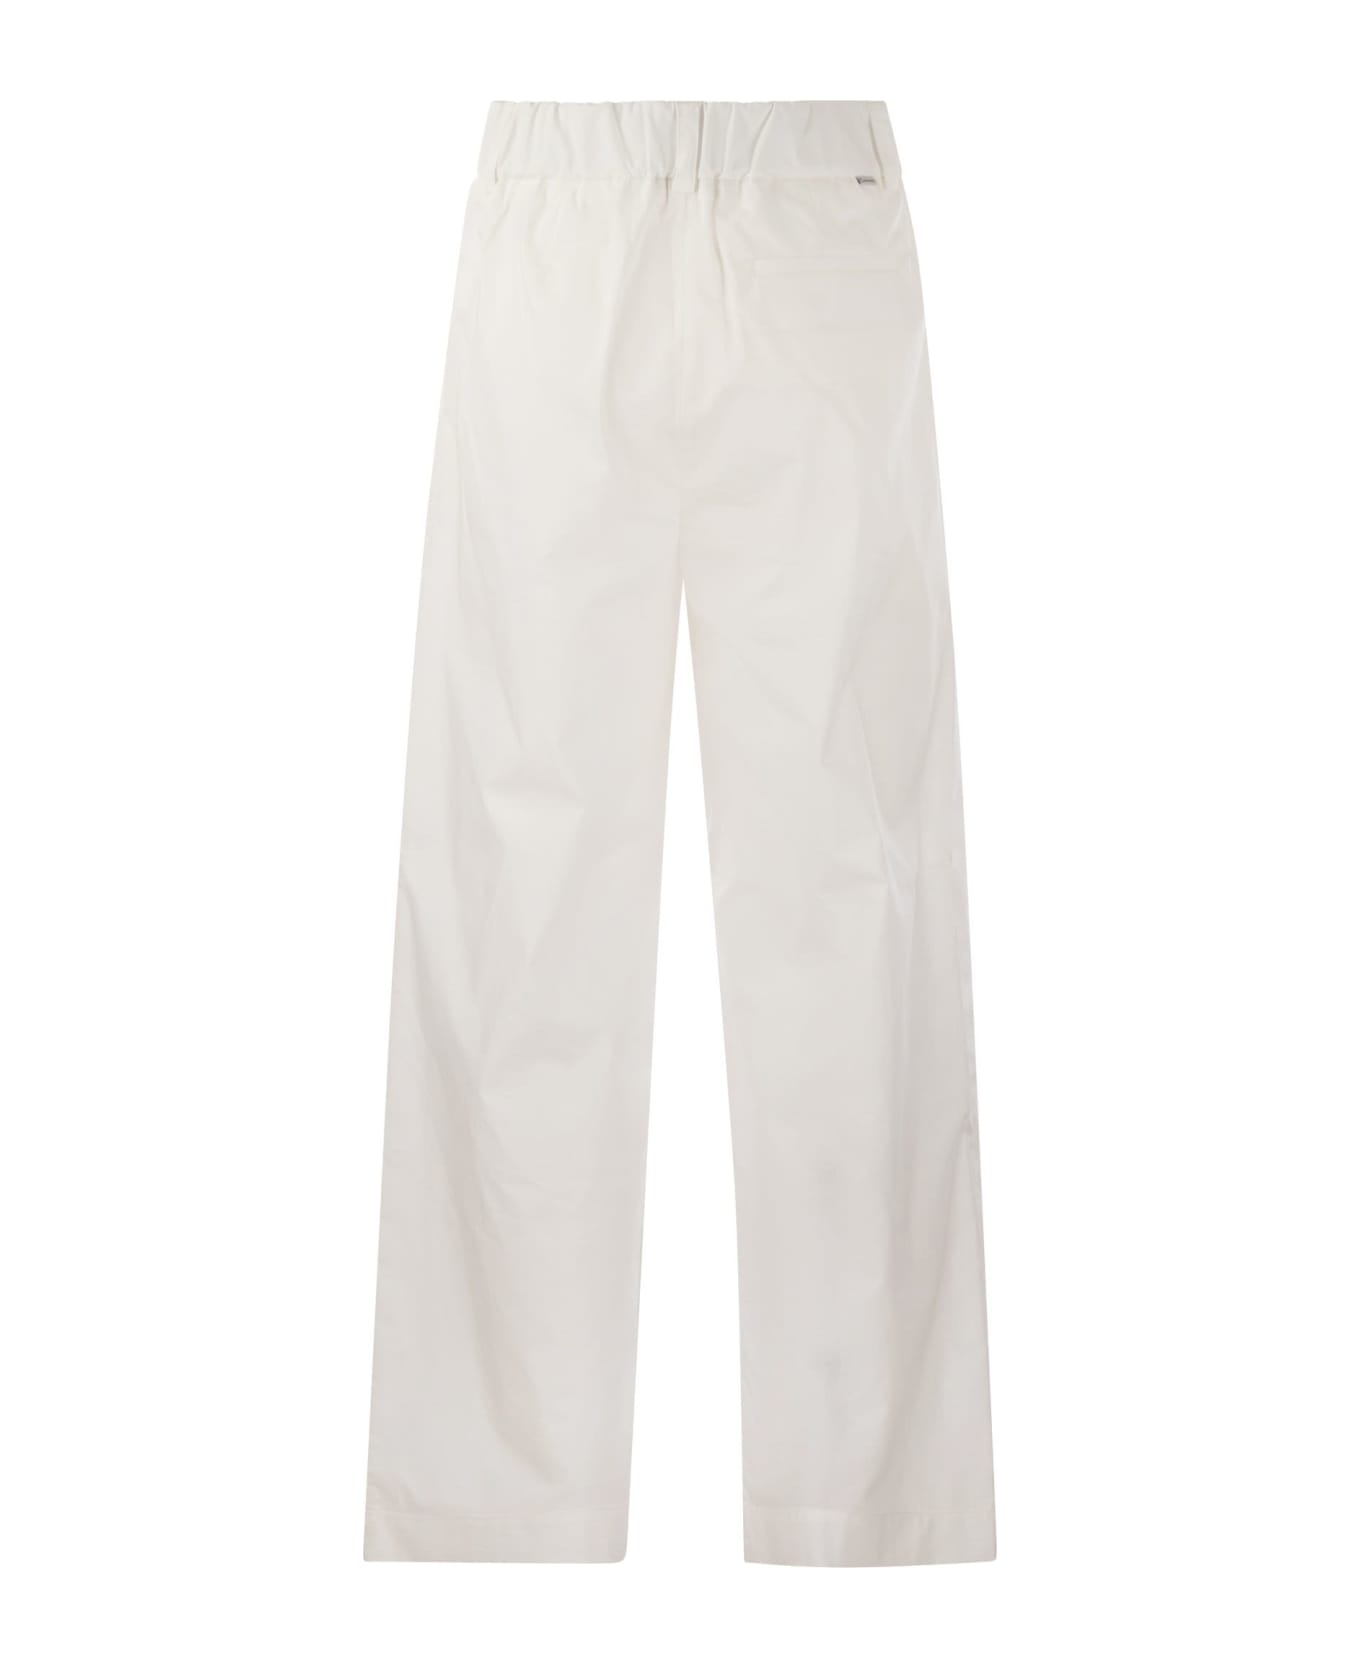 Woolrich Cotton Pleated Trousers - Bianco ボトムス